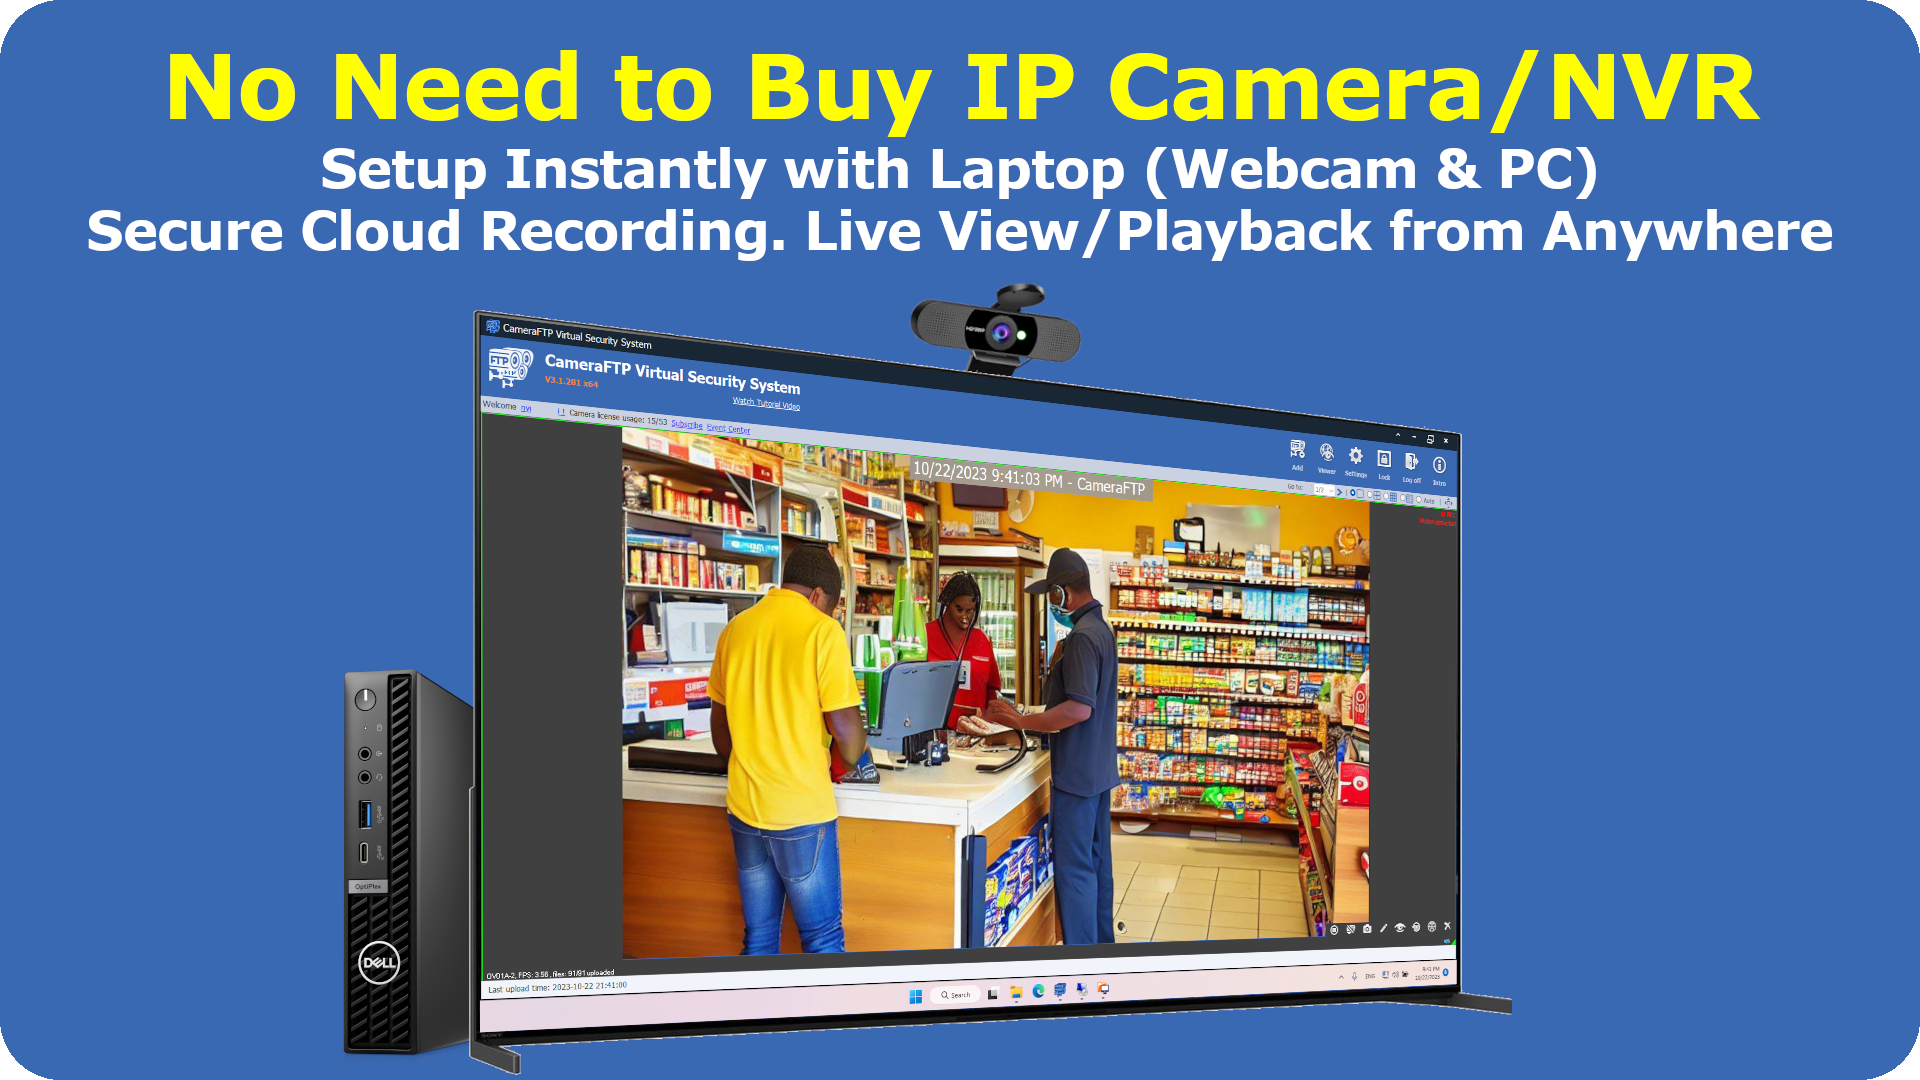 Setup instantly, no need to buy IP camera/NVR. Secure cloud recording, live view and play back from anywhere